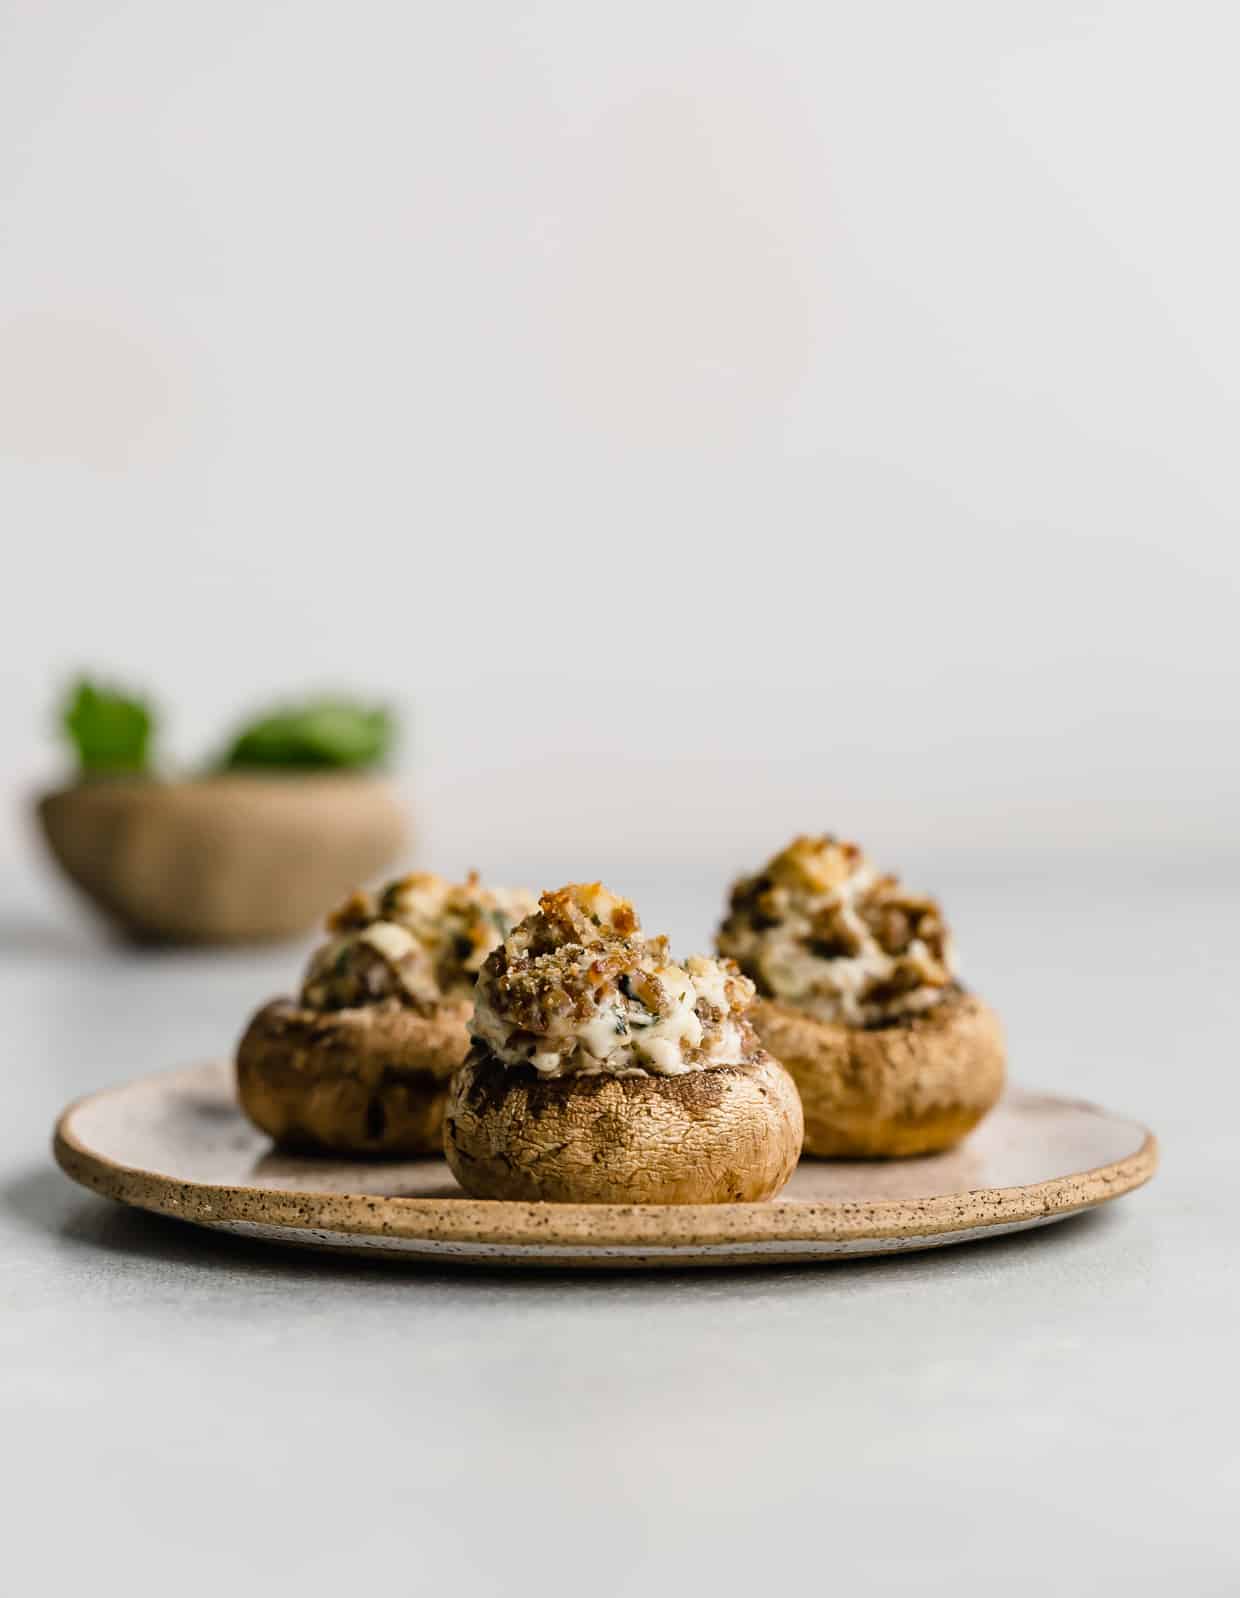 Italian Sausage Stuffed Mushrooms on a plate against a white background.